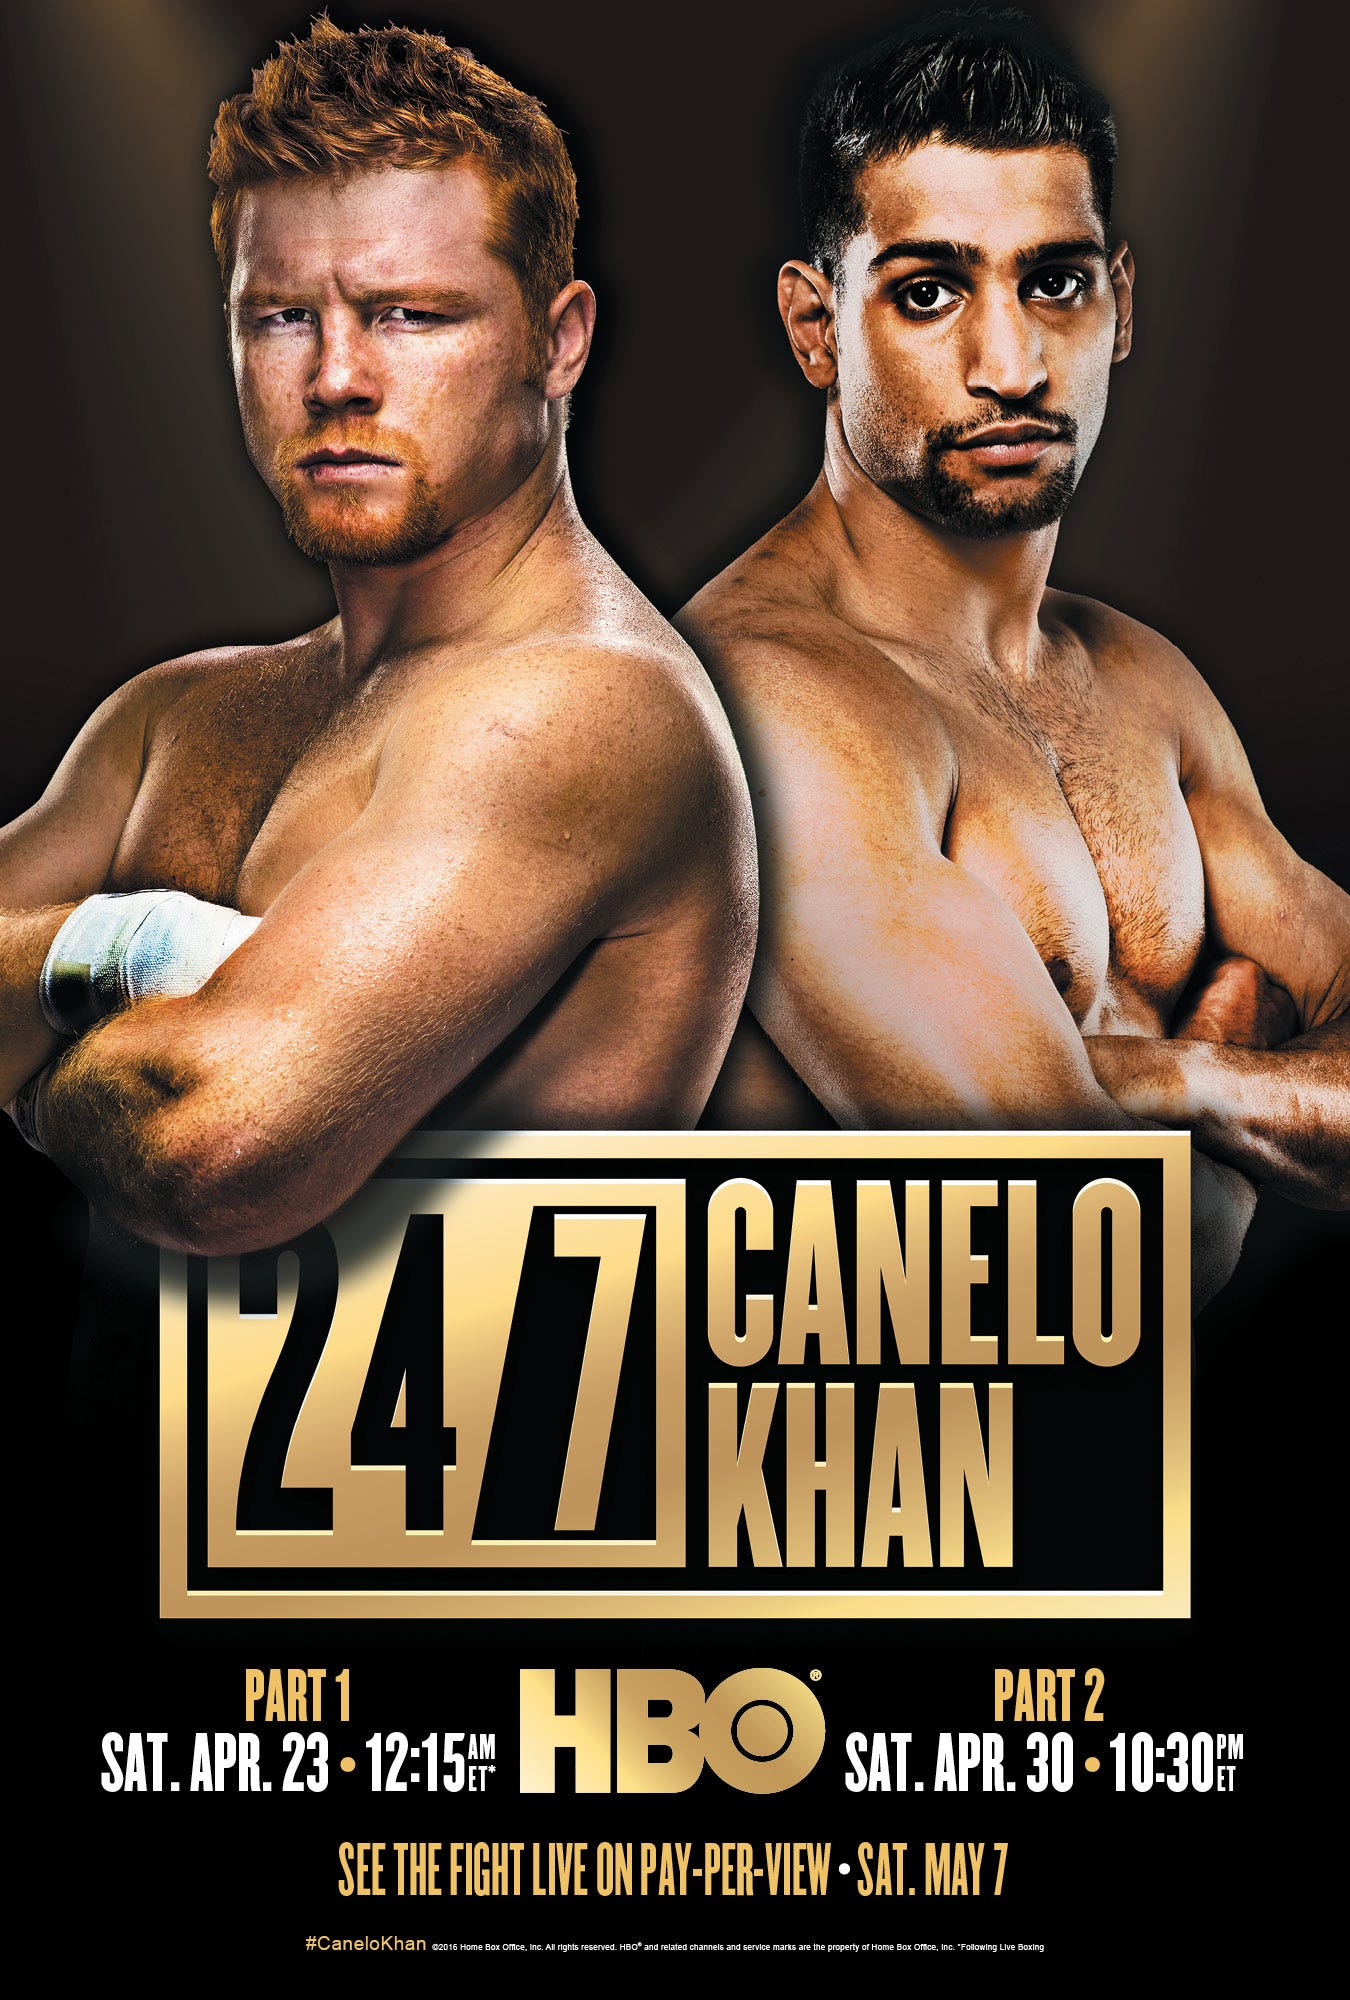 HBO SPORTS 24/7 CANELO/KHAN, A BEHIND-THE-SCENES SERIES LEADING UP TO THE PAY-PER-VIEW MEGA-FIGHT IN LAS VEGAS, DEBUTS APRIL 23 ON HBO by WarnerMedia Entertainment WarnerMedia Entertainment Medium